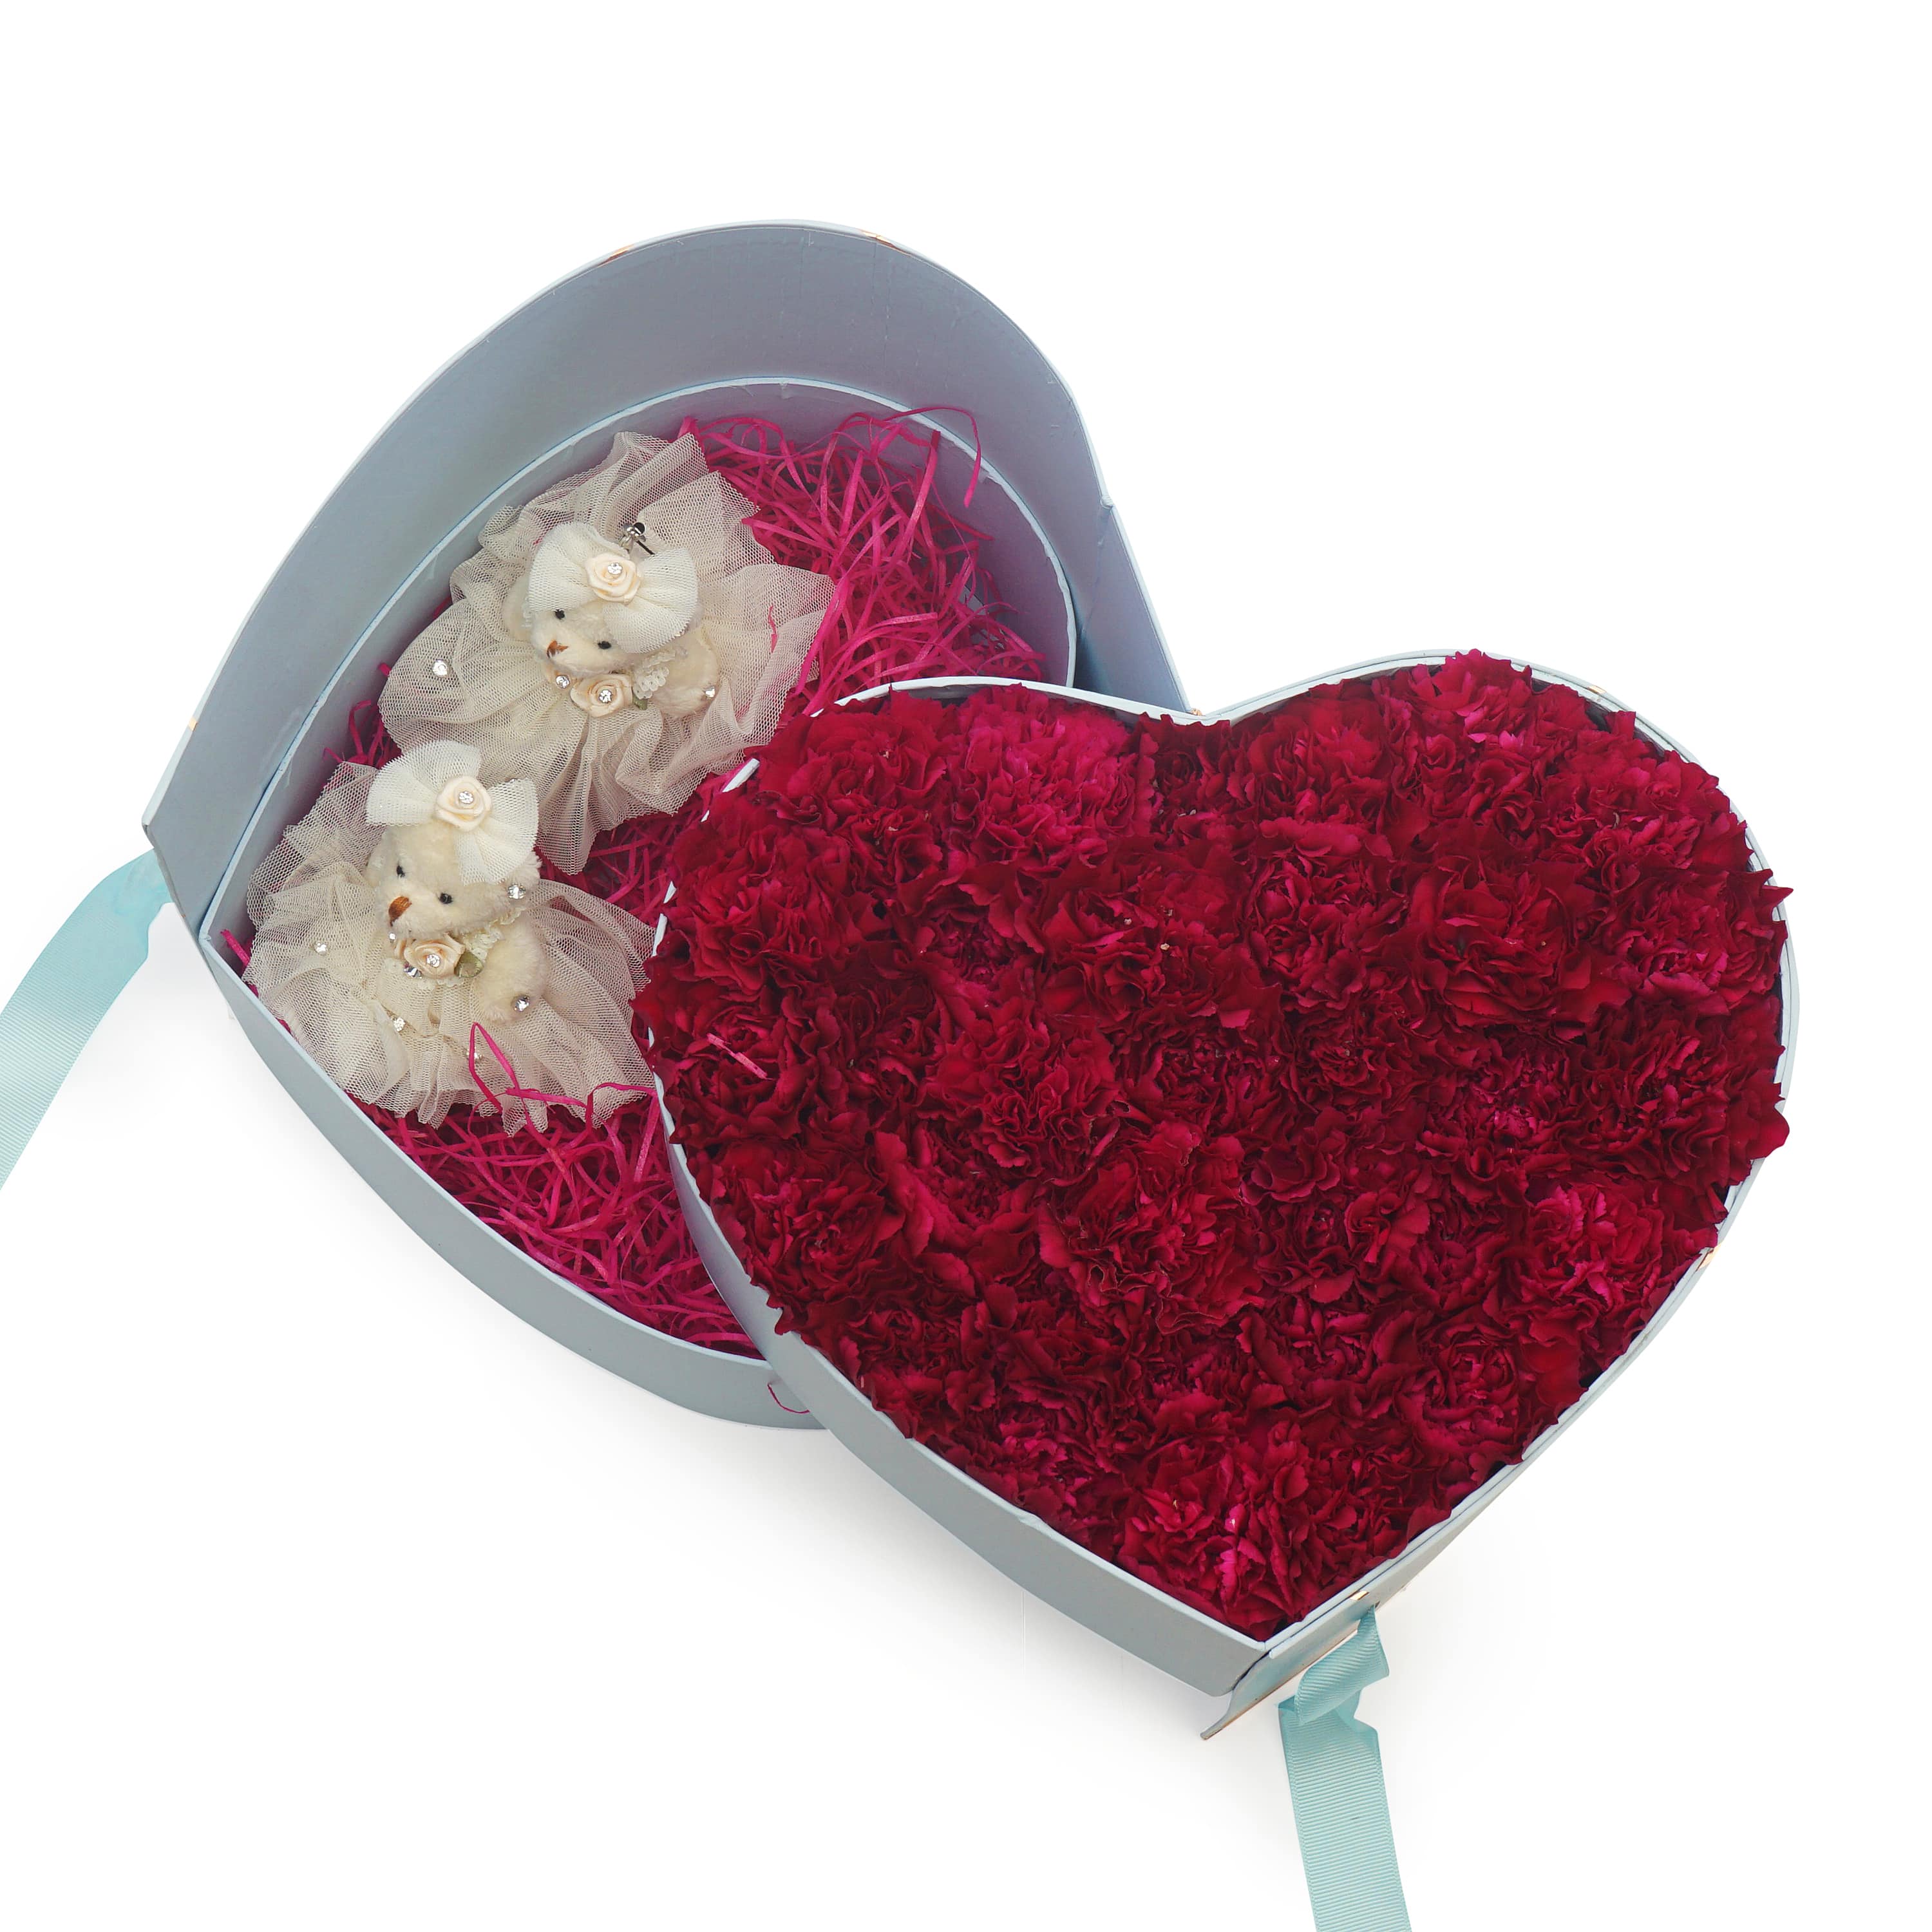 carnations in a heart shaped container